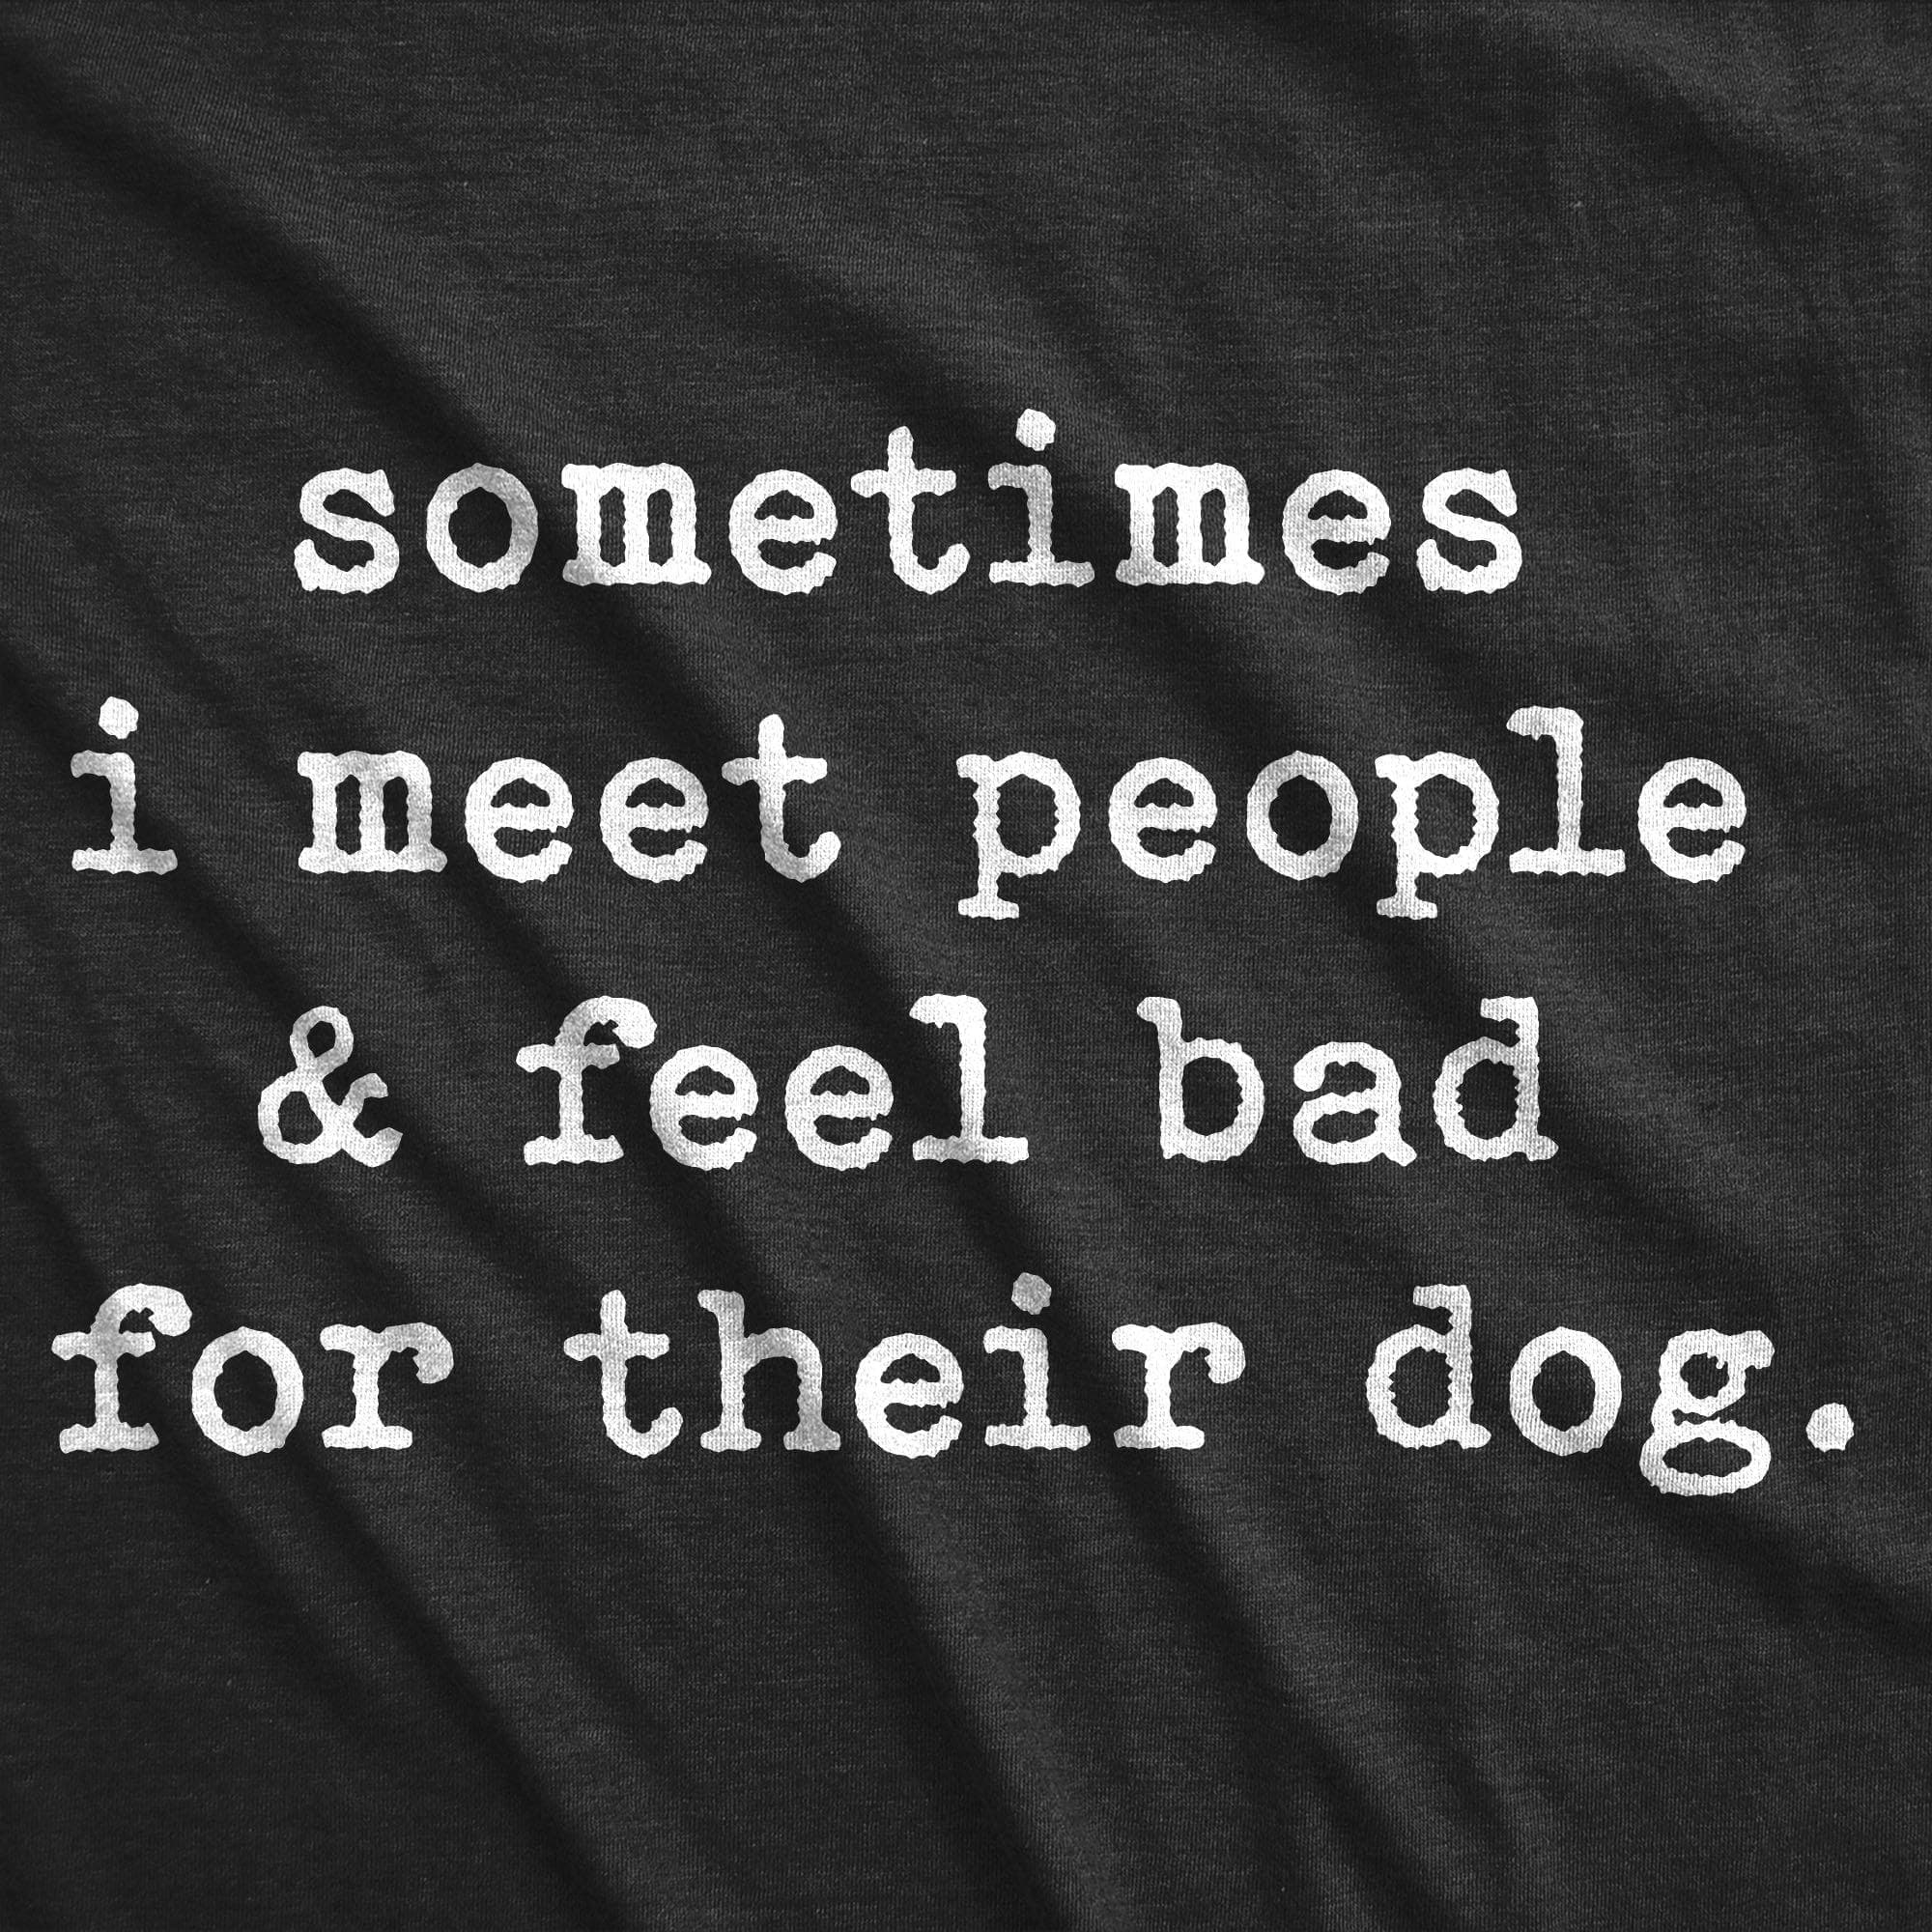 Sometimes I Meet People And Feel Bad For Their Dog Men's Tshirt - Crazy Dog T-Shirts